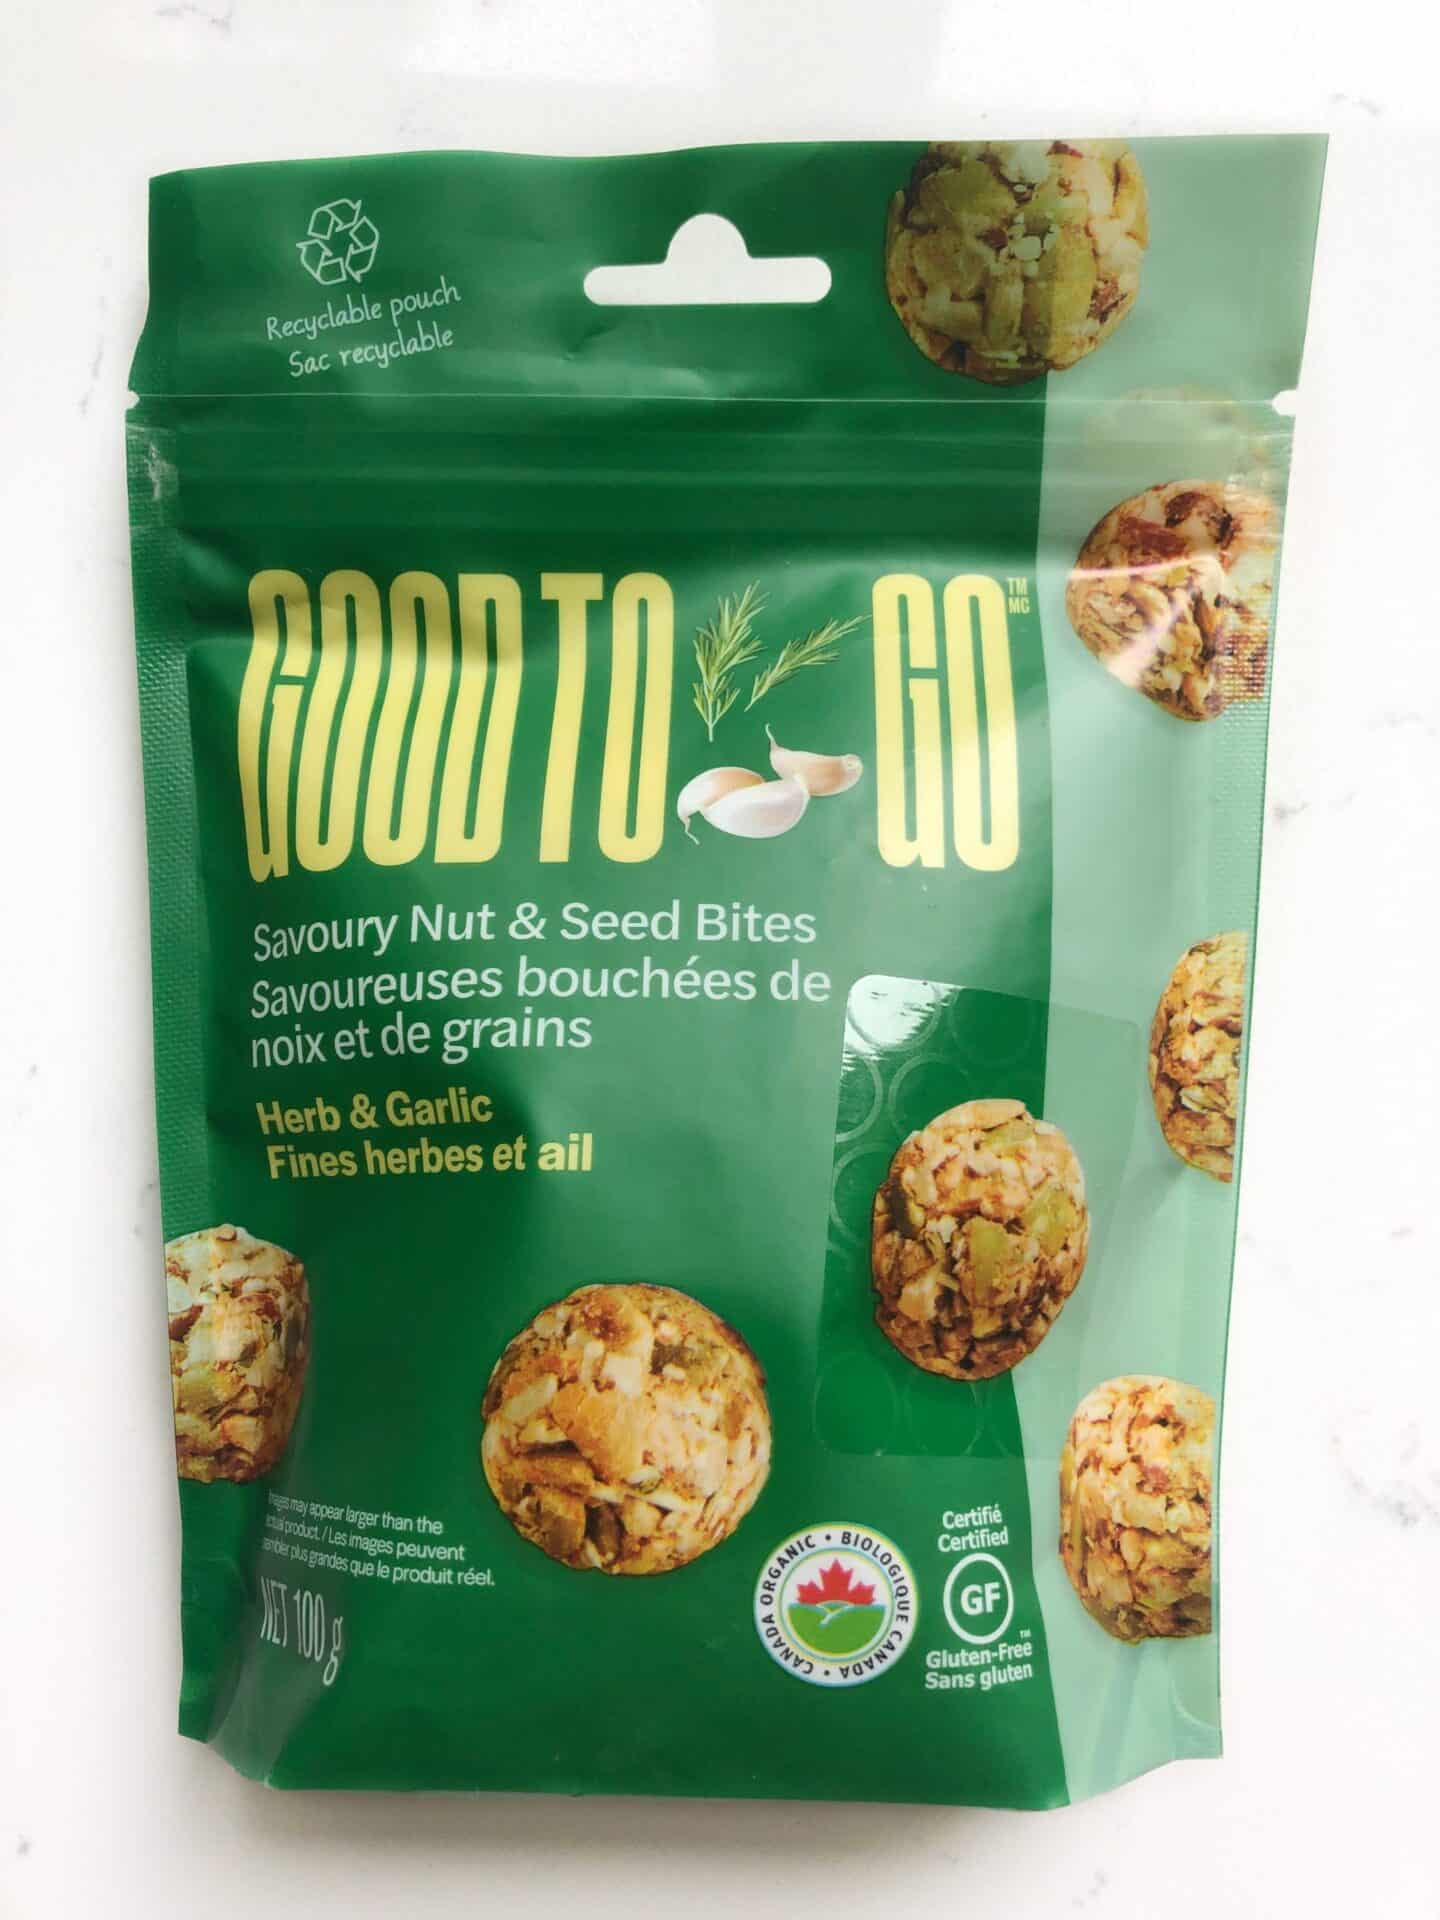 Good To Go Savoury Nut & Seed Bites – Dietitian Review